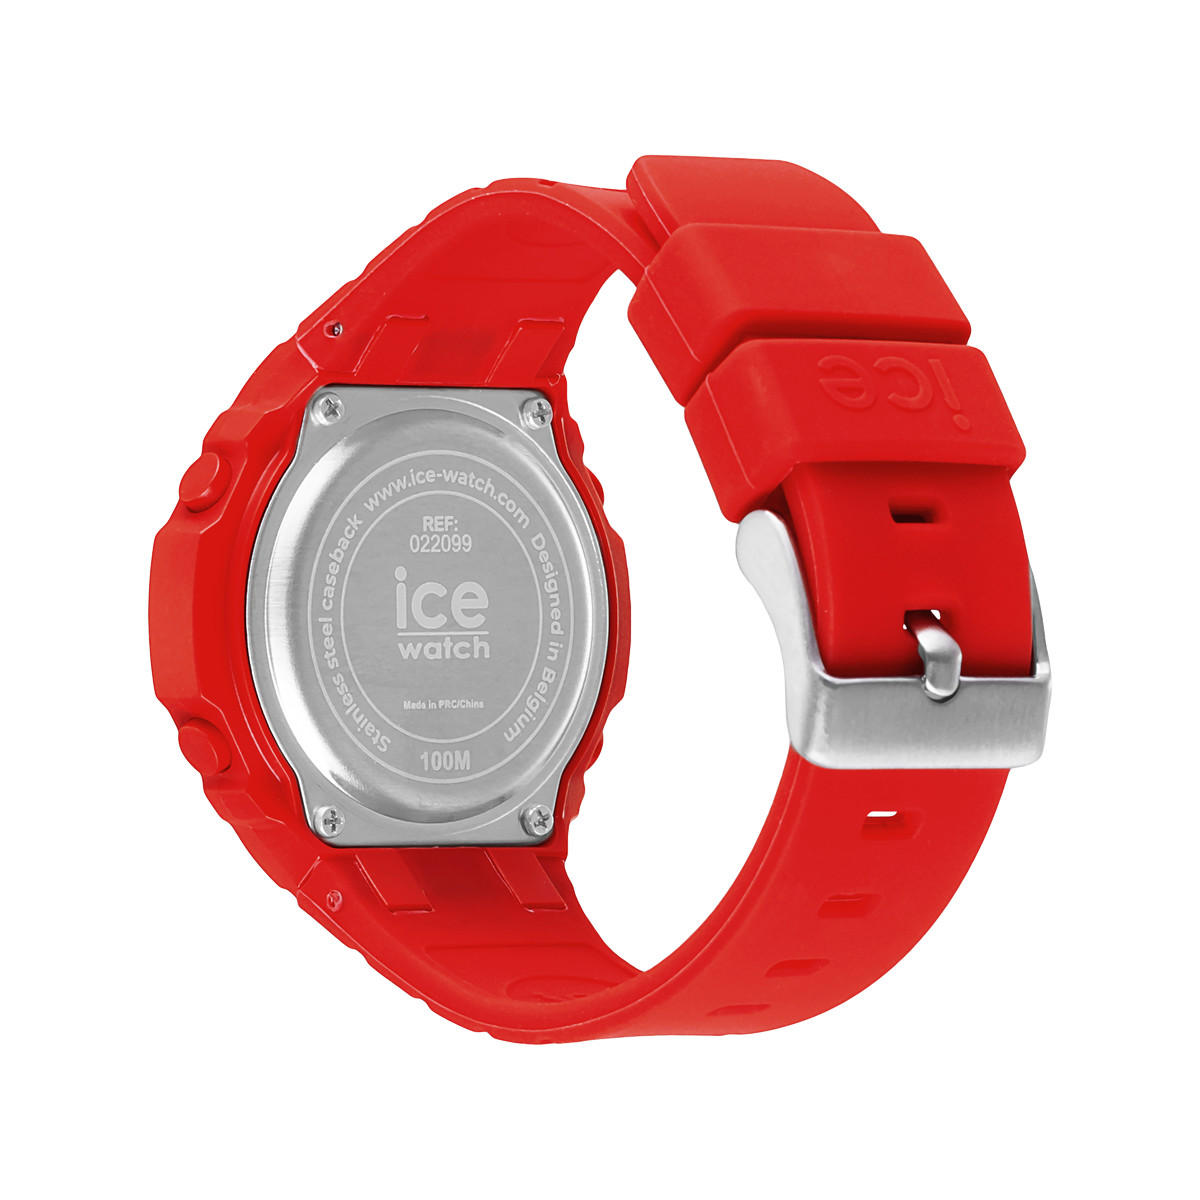 Montre ICE WATCH ice digit ultra femme bracelet silicone rouge - vue 3